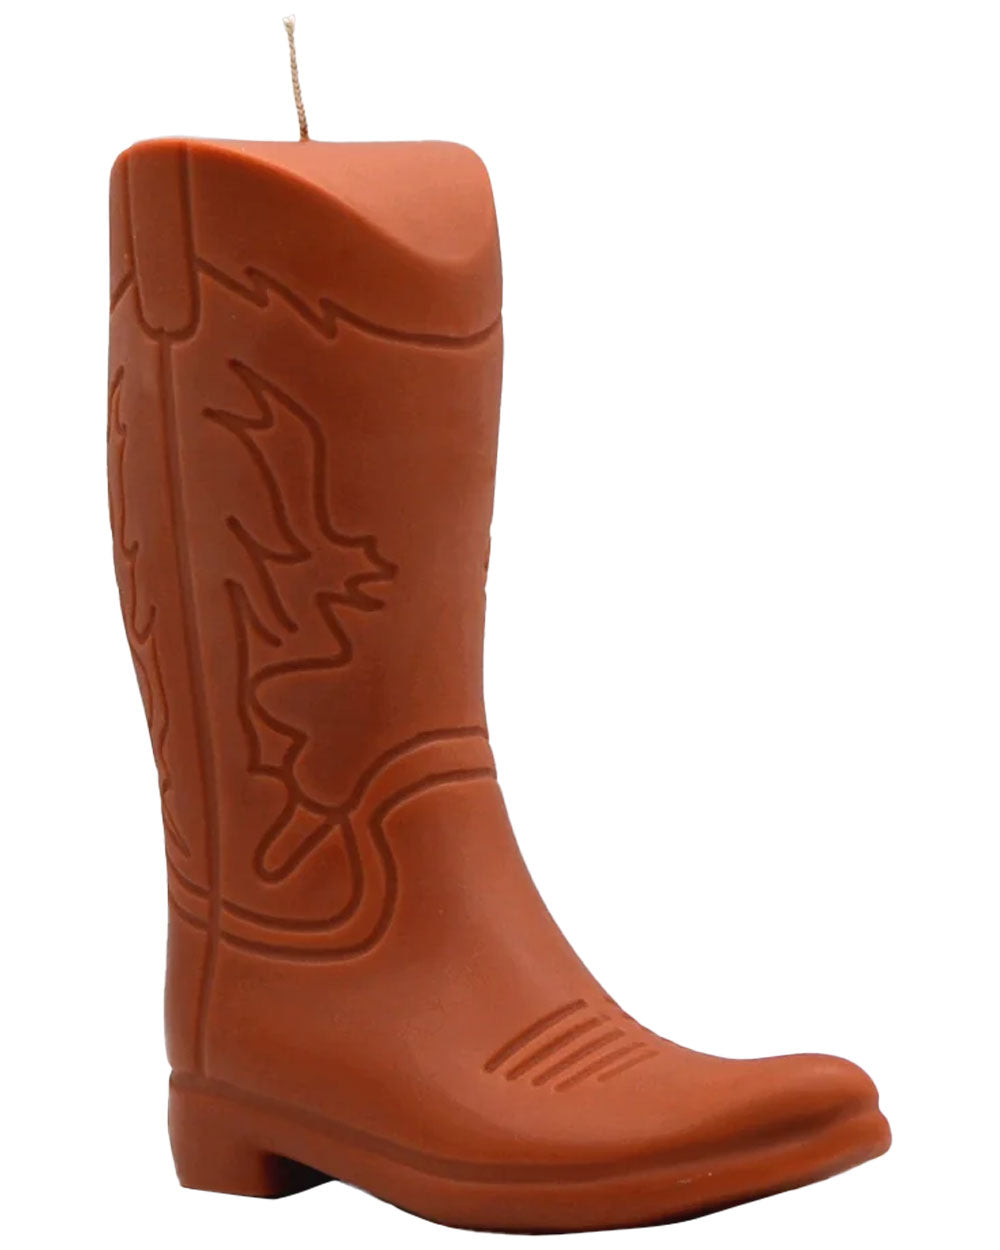 Cowboy Boot Candle in Cognac